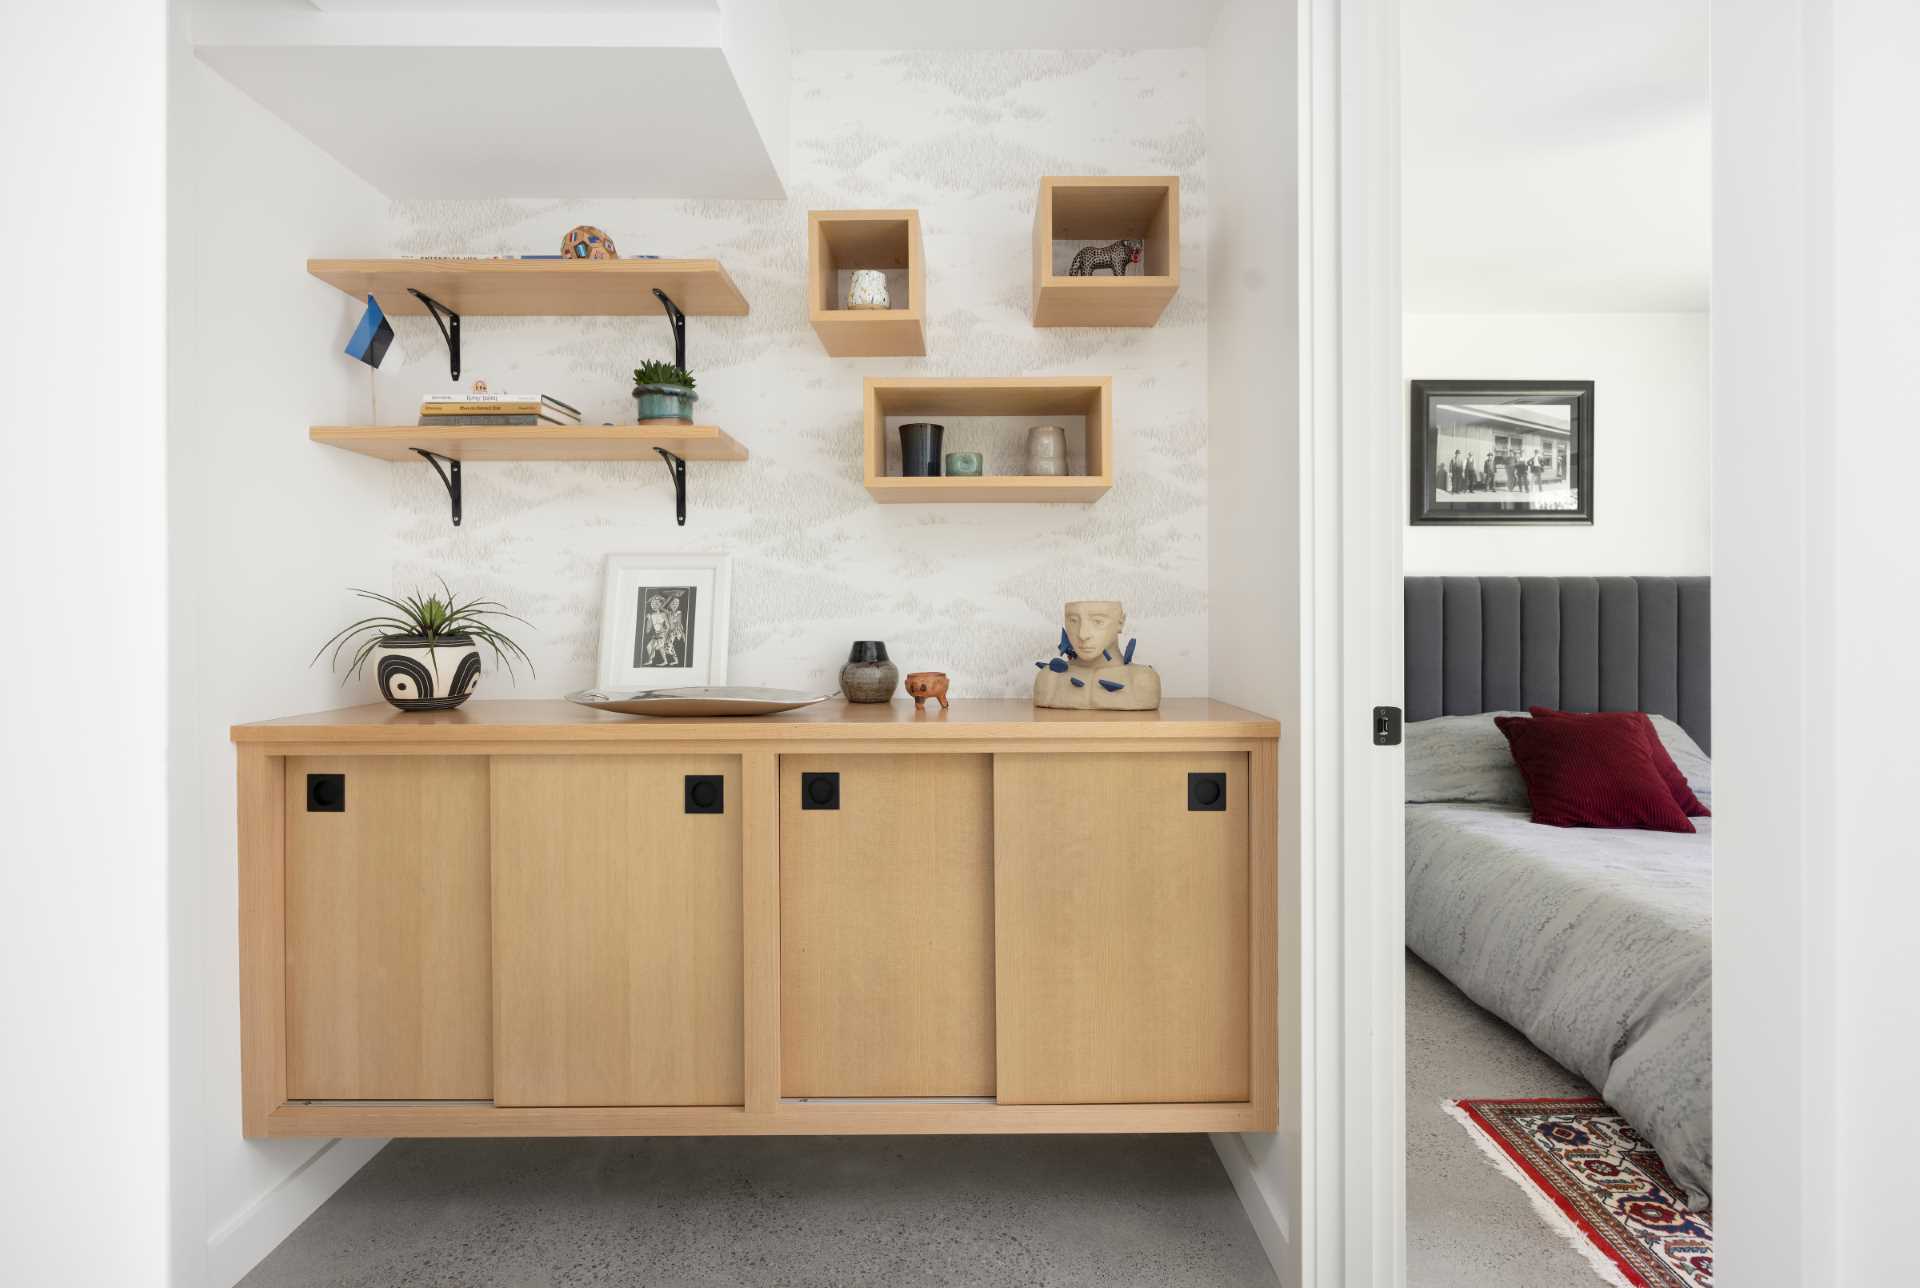 An updated interior includes a wood cabinet outside a bedroom, while inside the bedroom there's a dark grey upholstered headboard and a sliding door that opens to the outdoors.